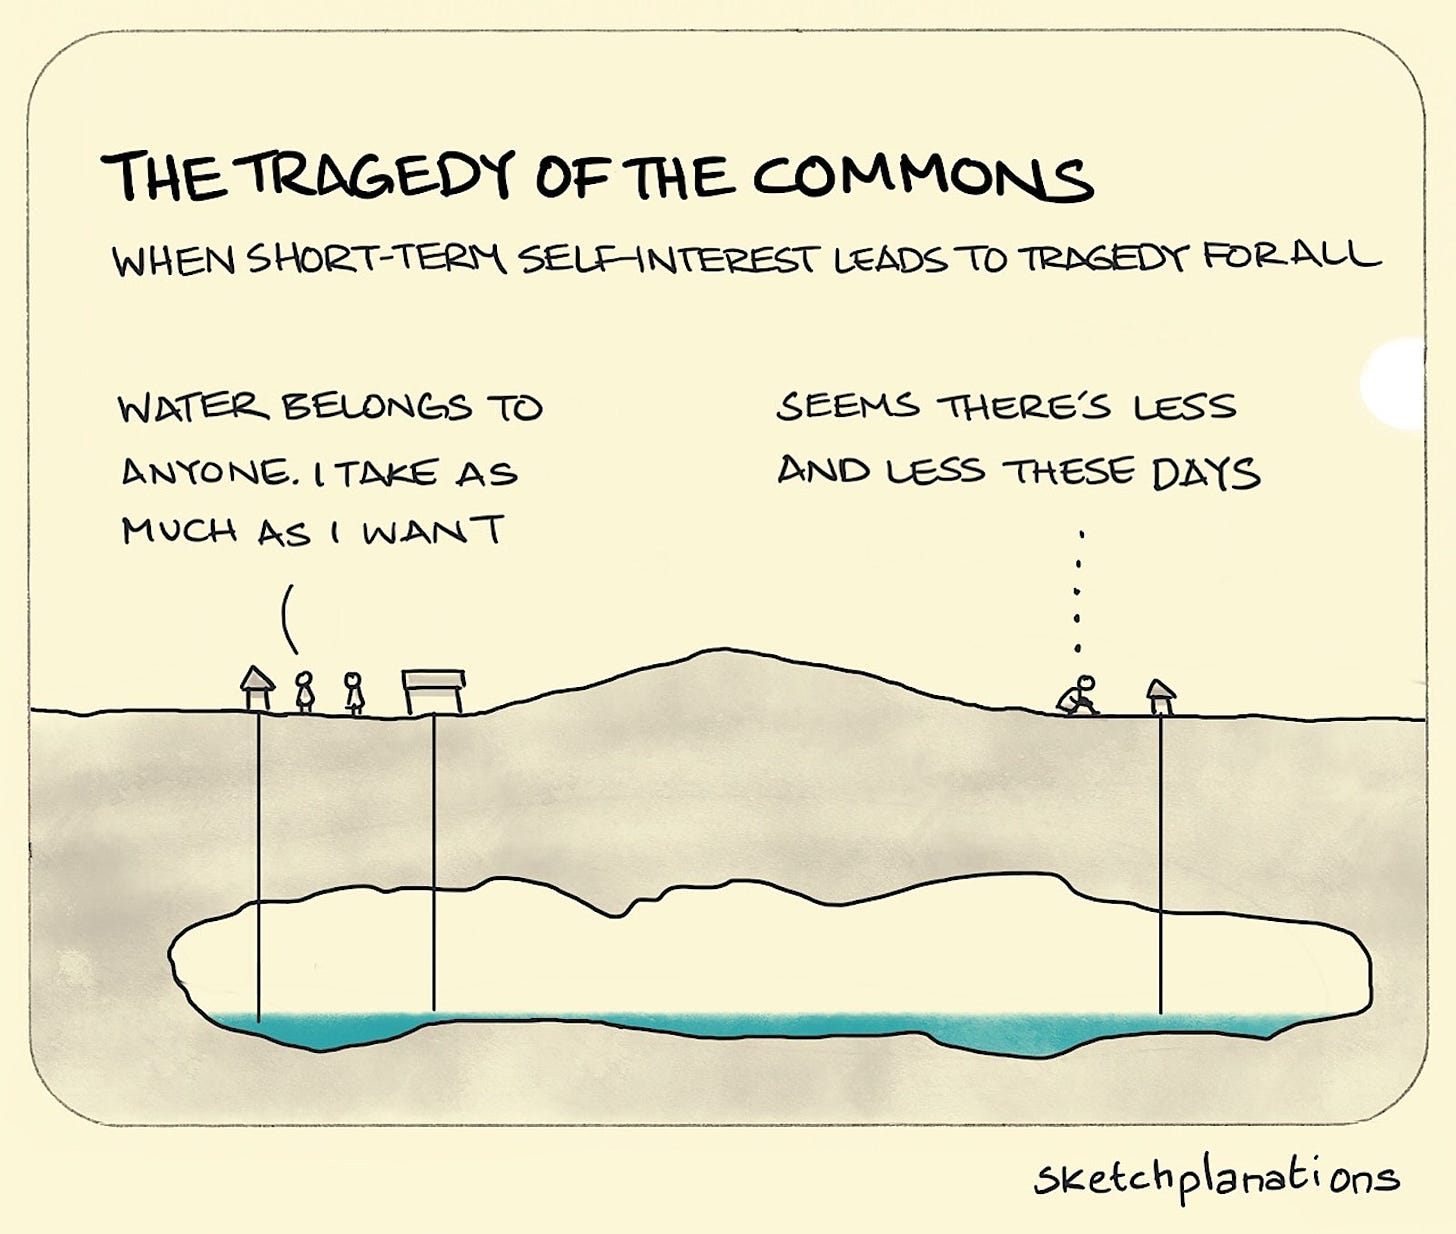 The tragedy of the commons - Sketchplanations